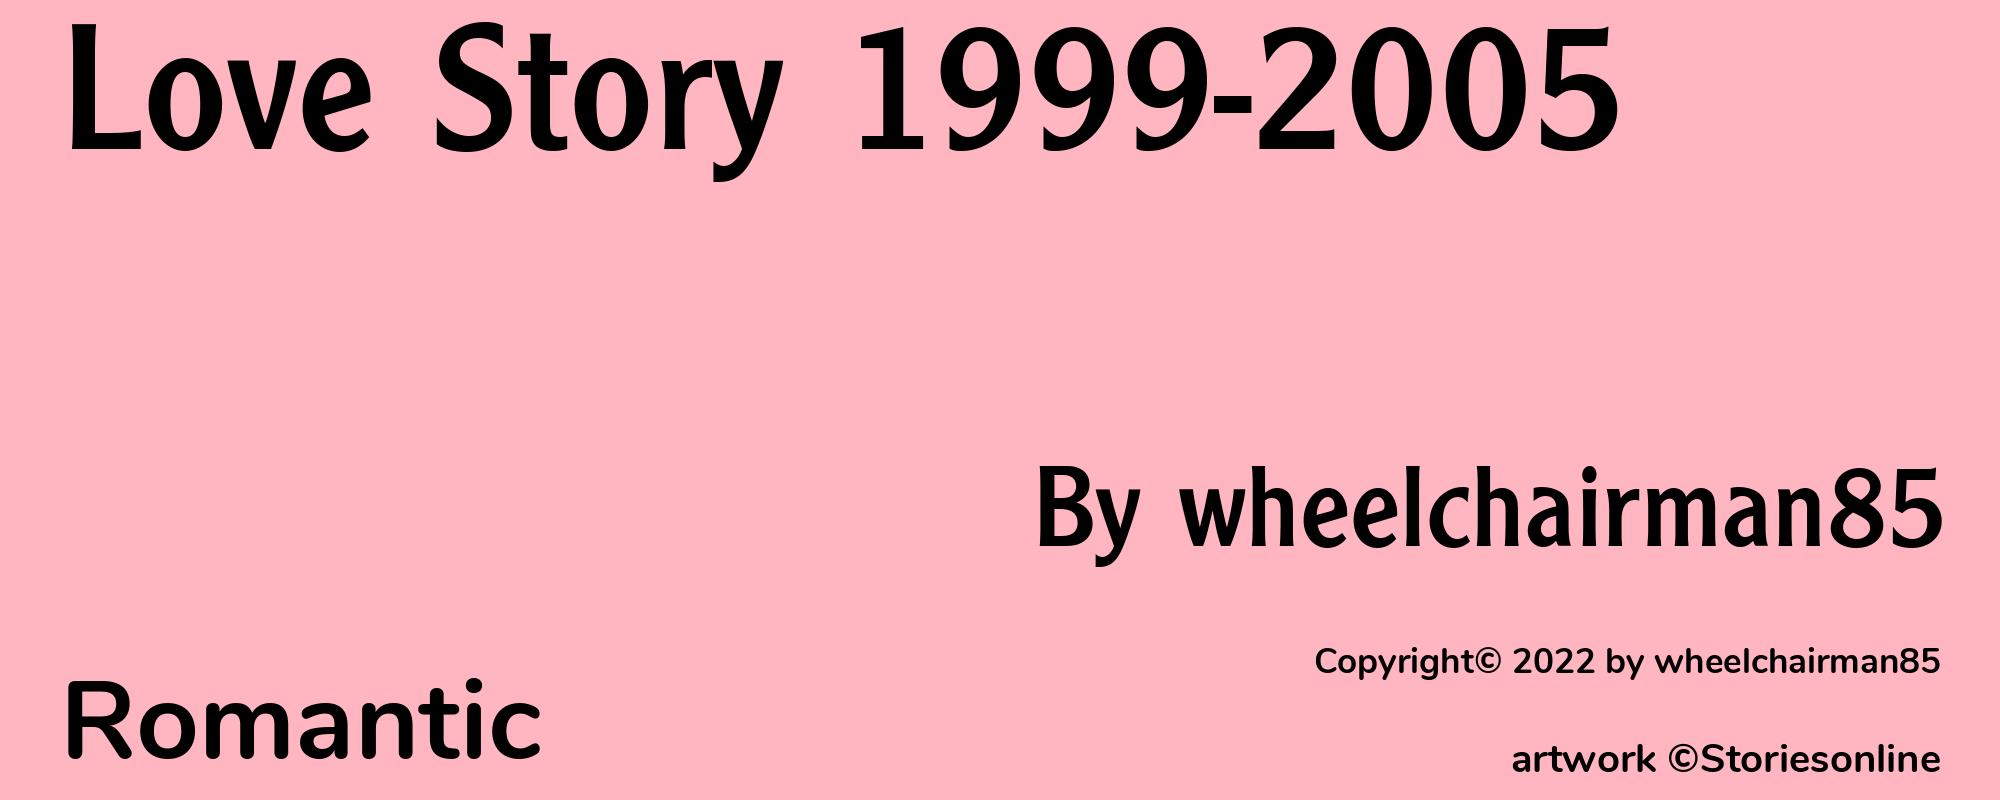 Love Story 1999-2005 - Cover